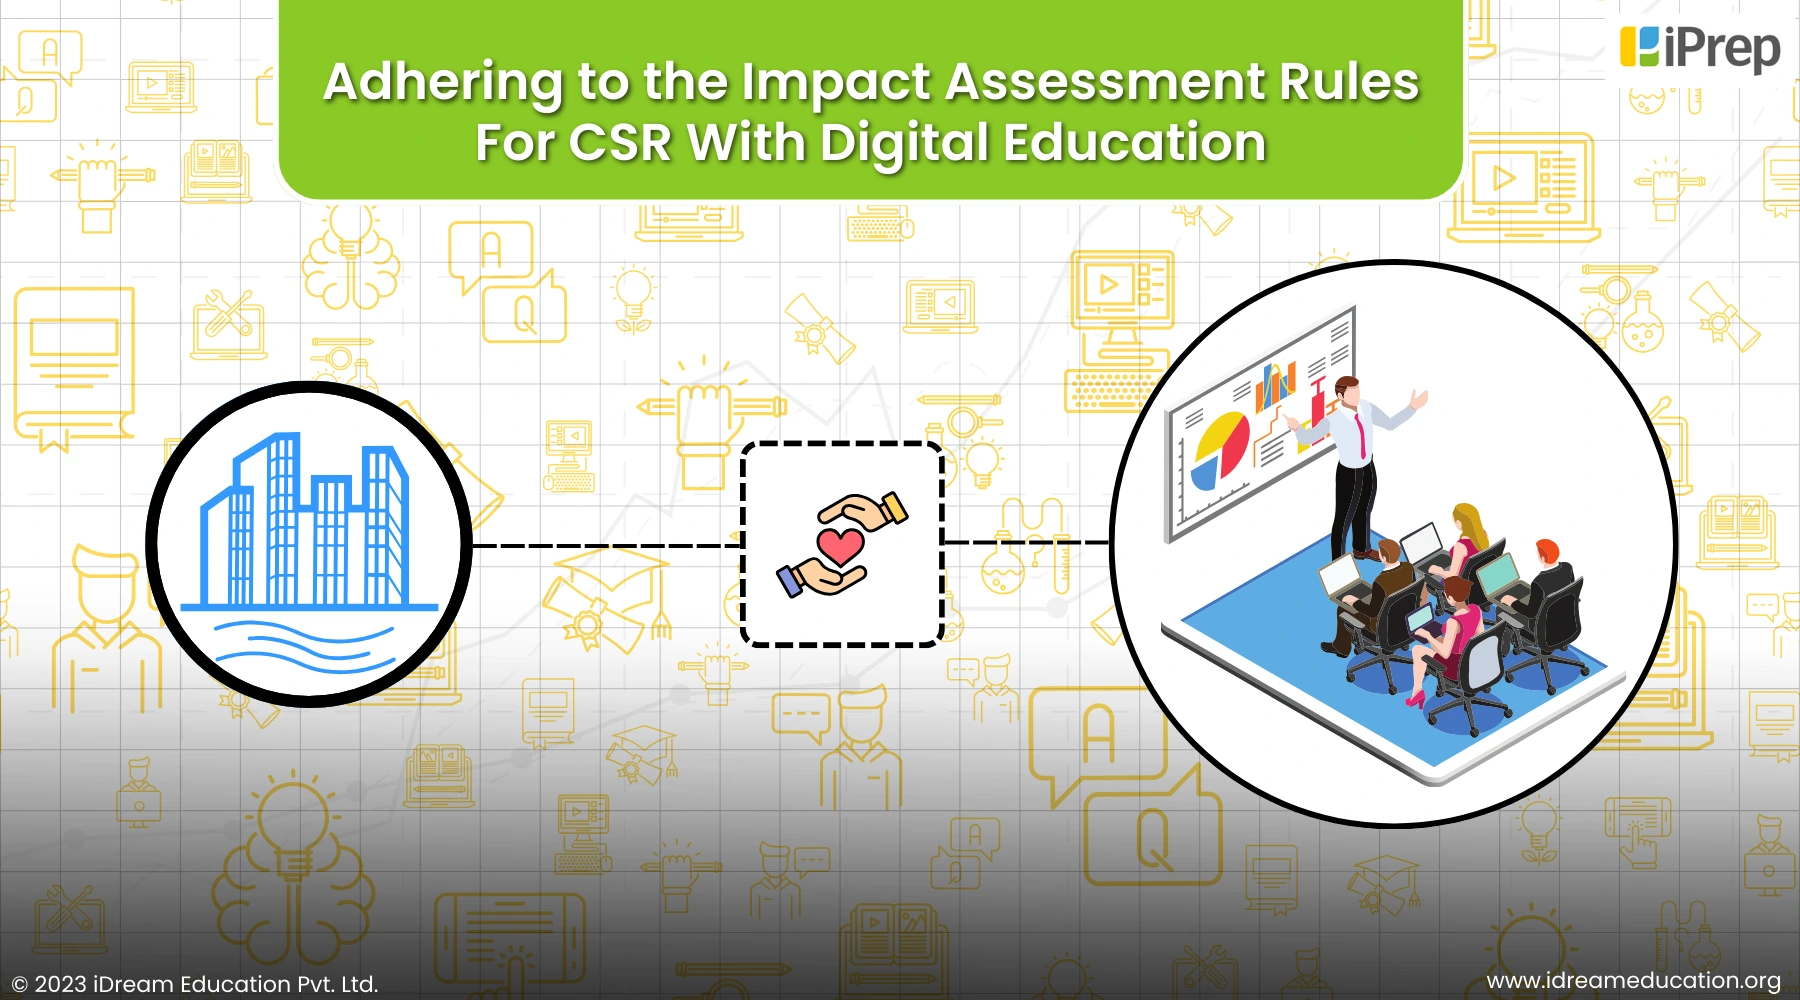 a visual representation of Corporations Adhering to Impact Assessment Rules For CSR with the power of Digital Education